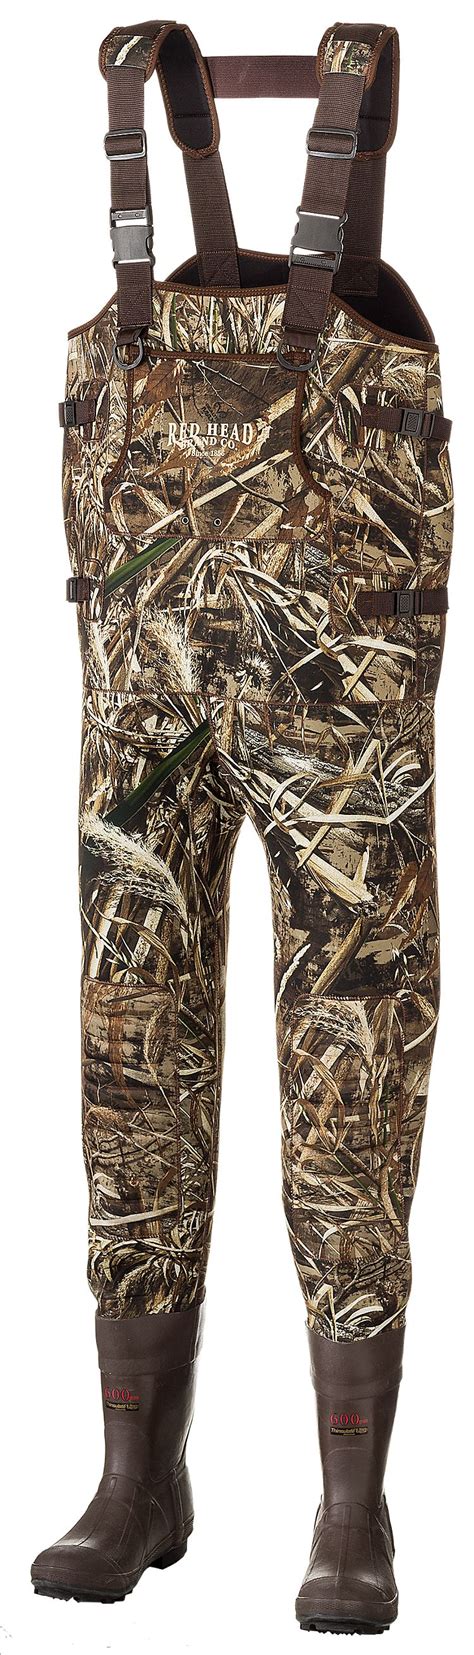 Redhead waders. Visit Cabela's for Redhead shoes and boots at affordable prices. Find hiking shoes, casual shoes, sandals, hunting boots, and more for men, women and kids. 